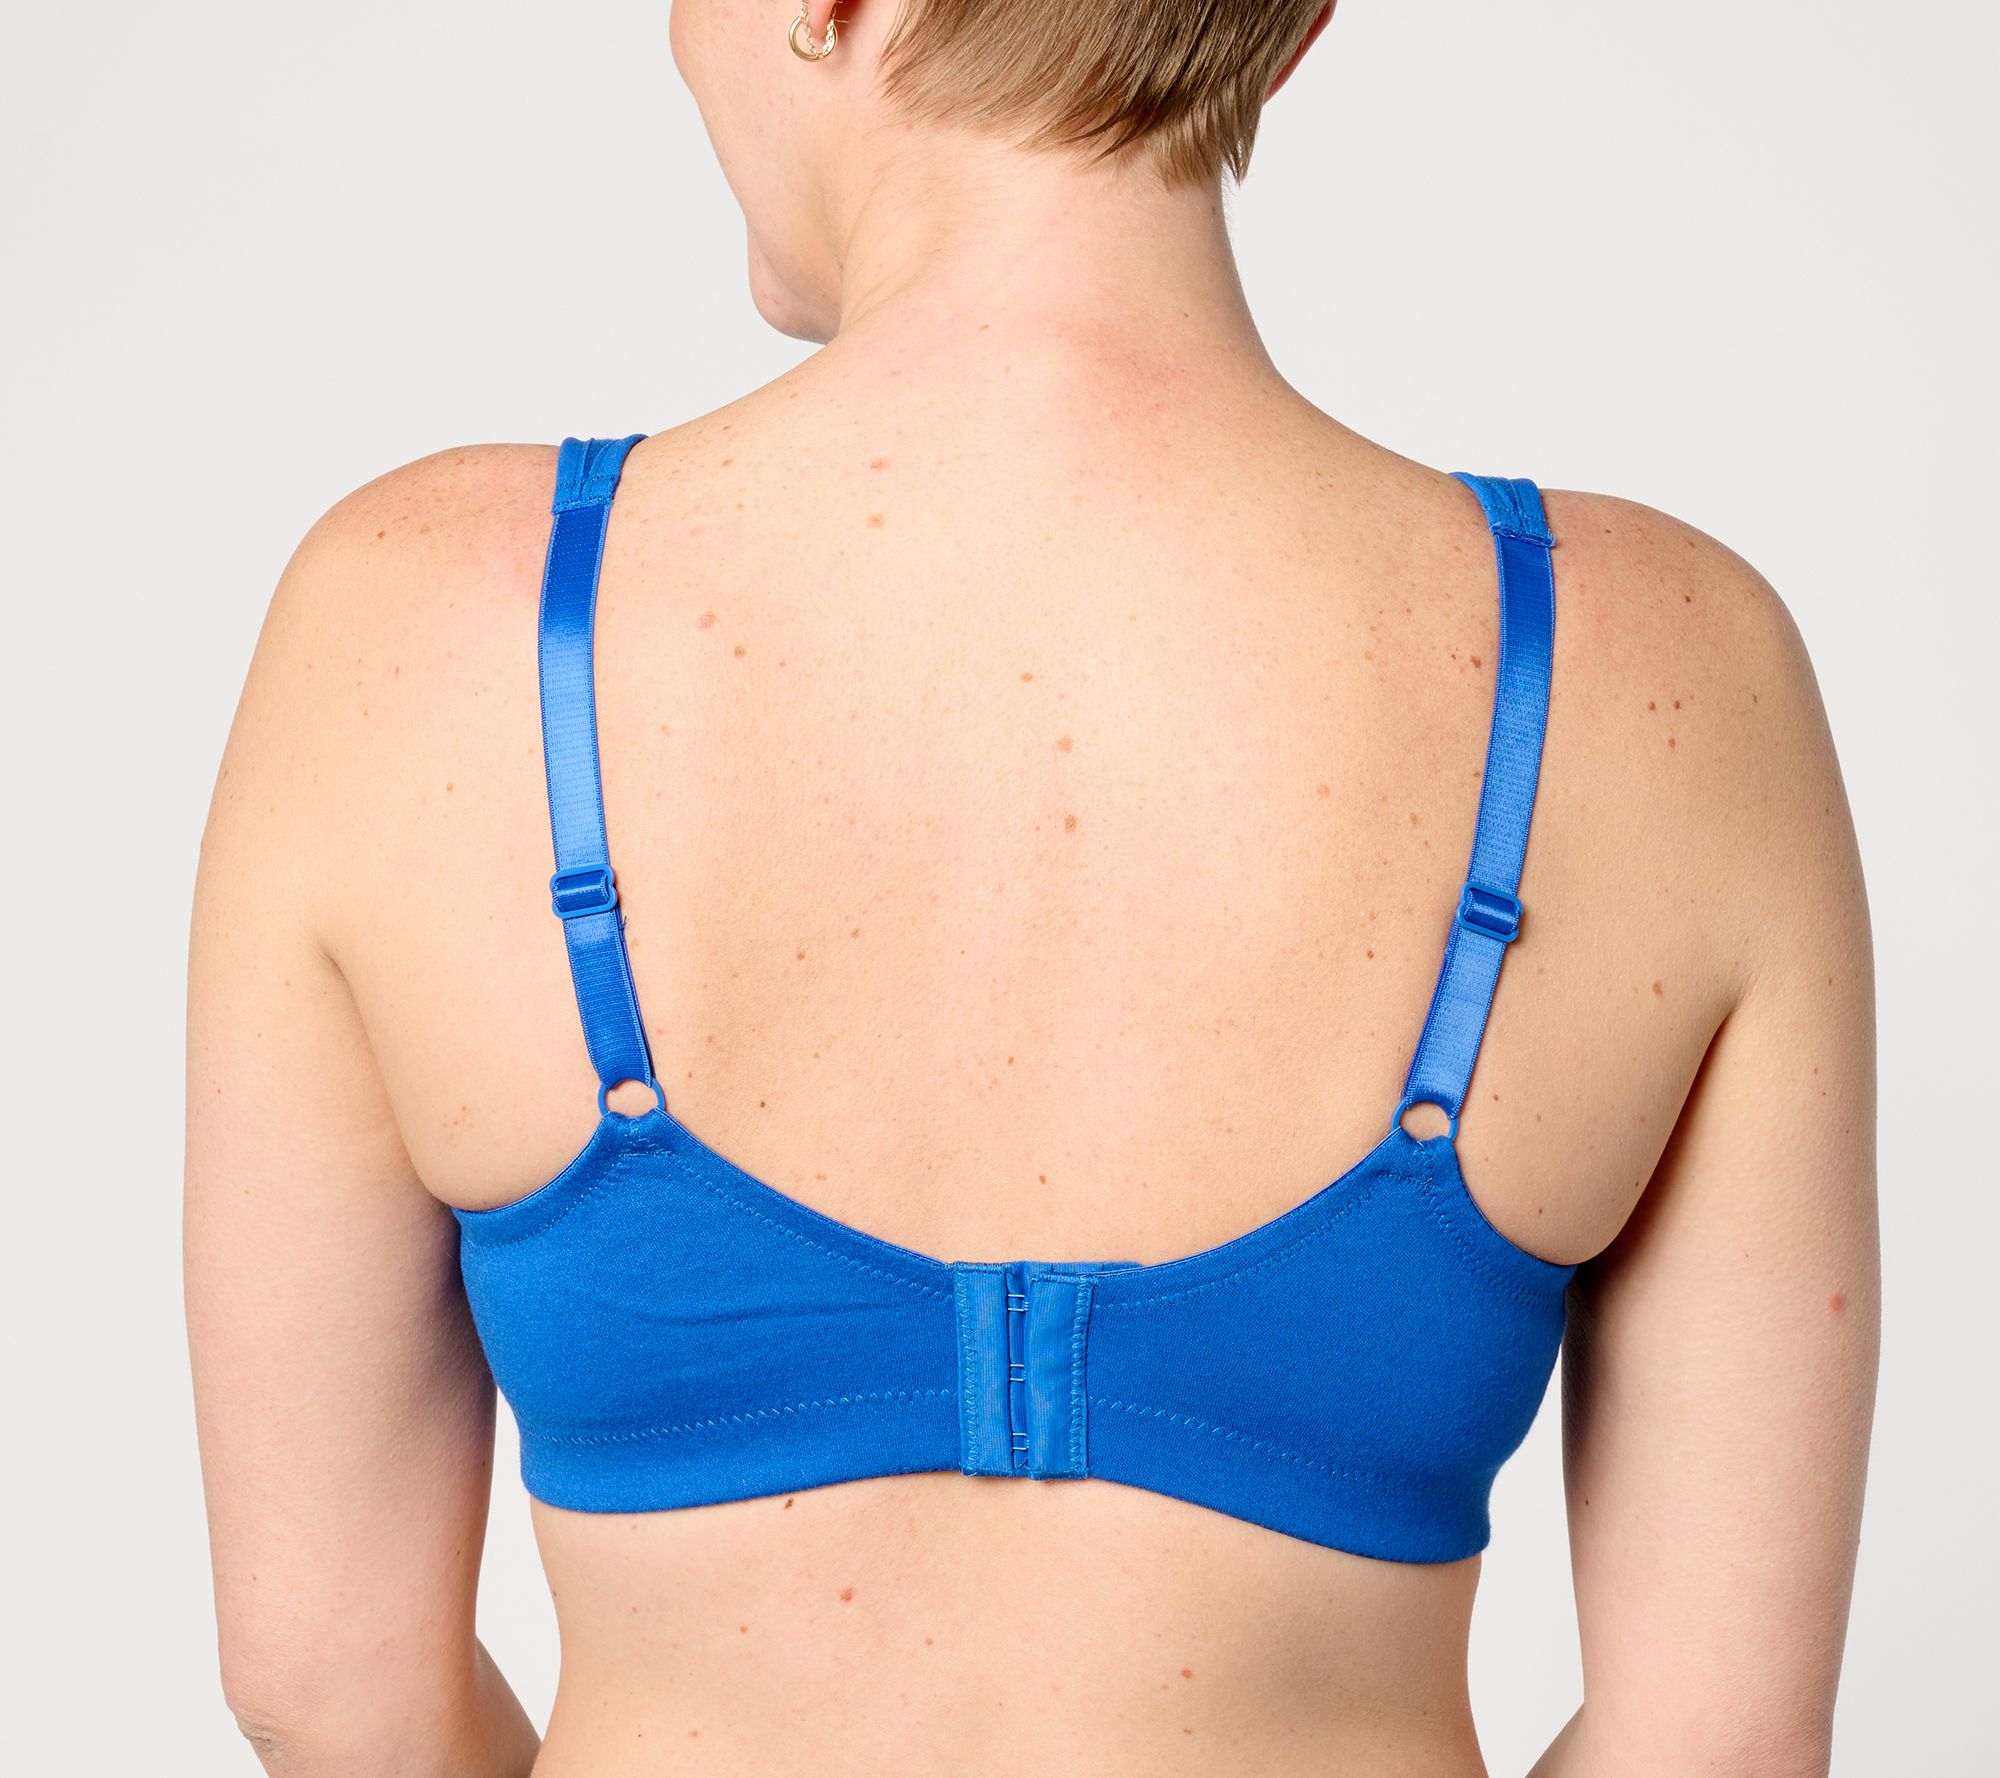 ELEGANCE six strap sports cotton bra for daily use soft and comfortable